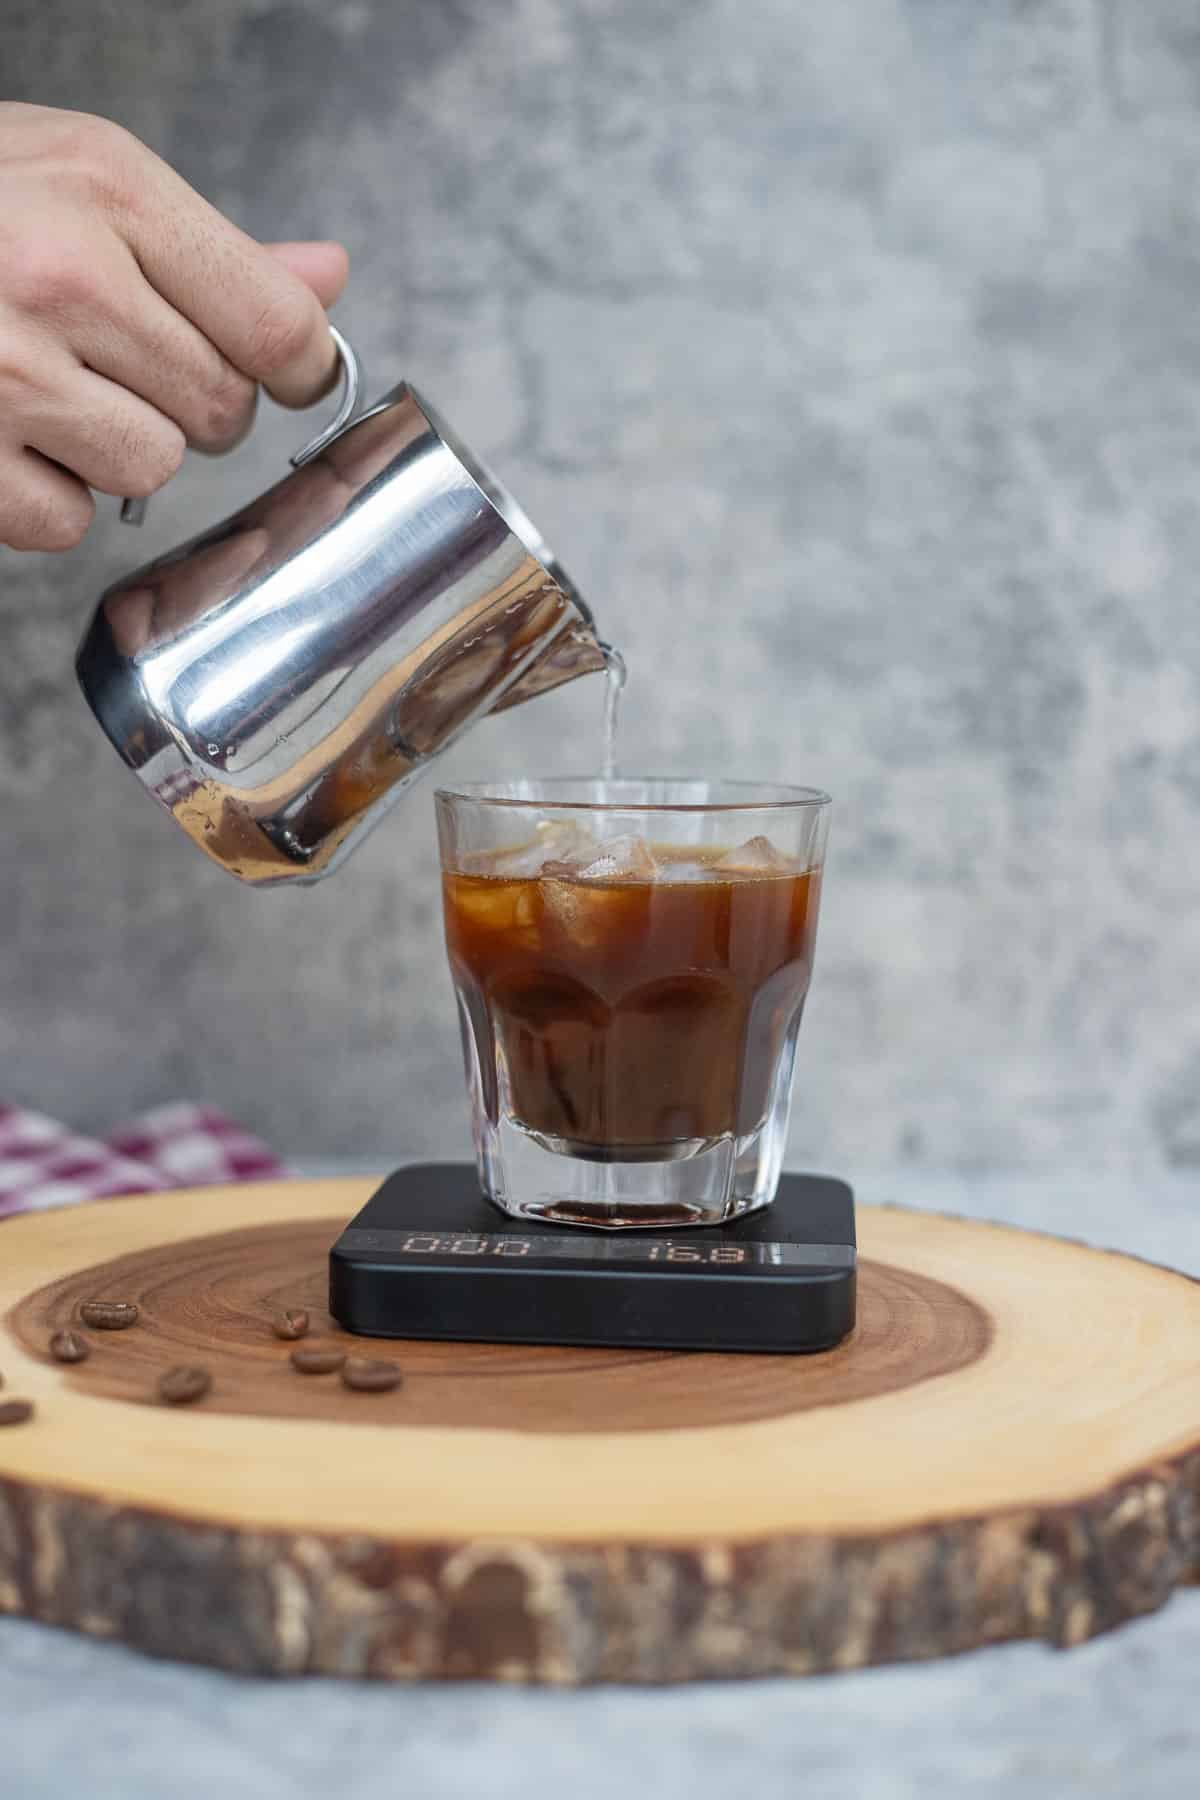 pouring water into iced americano on a kitchen scale